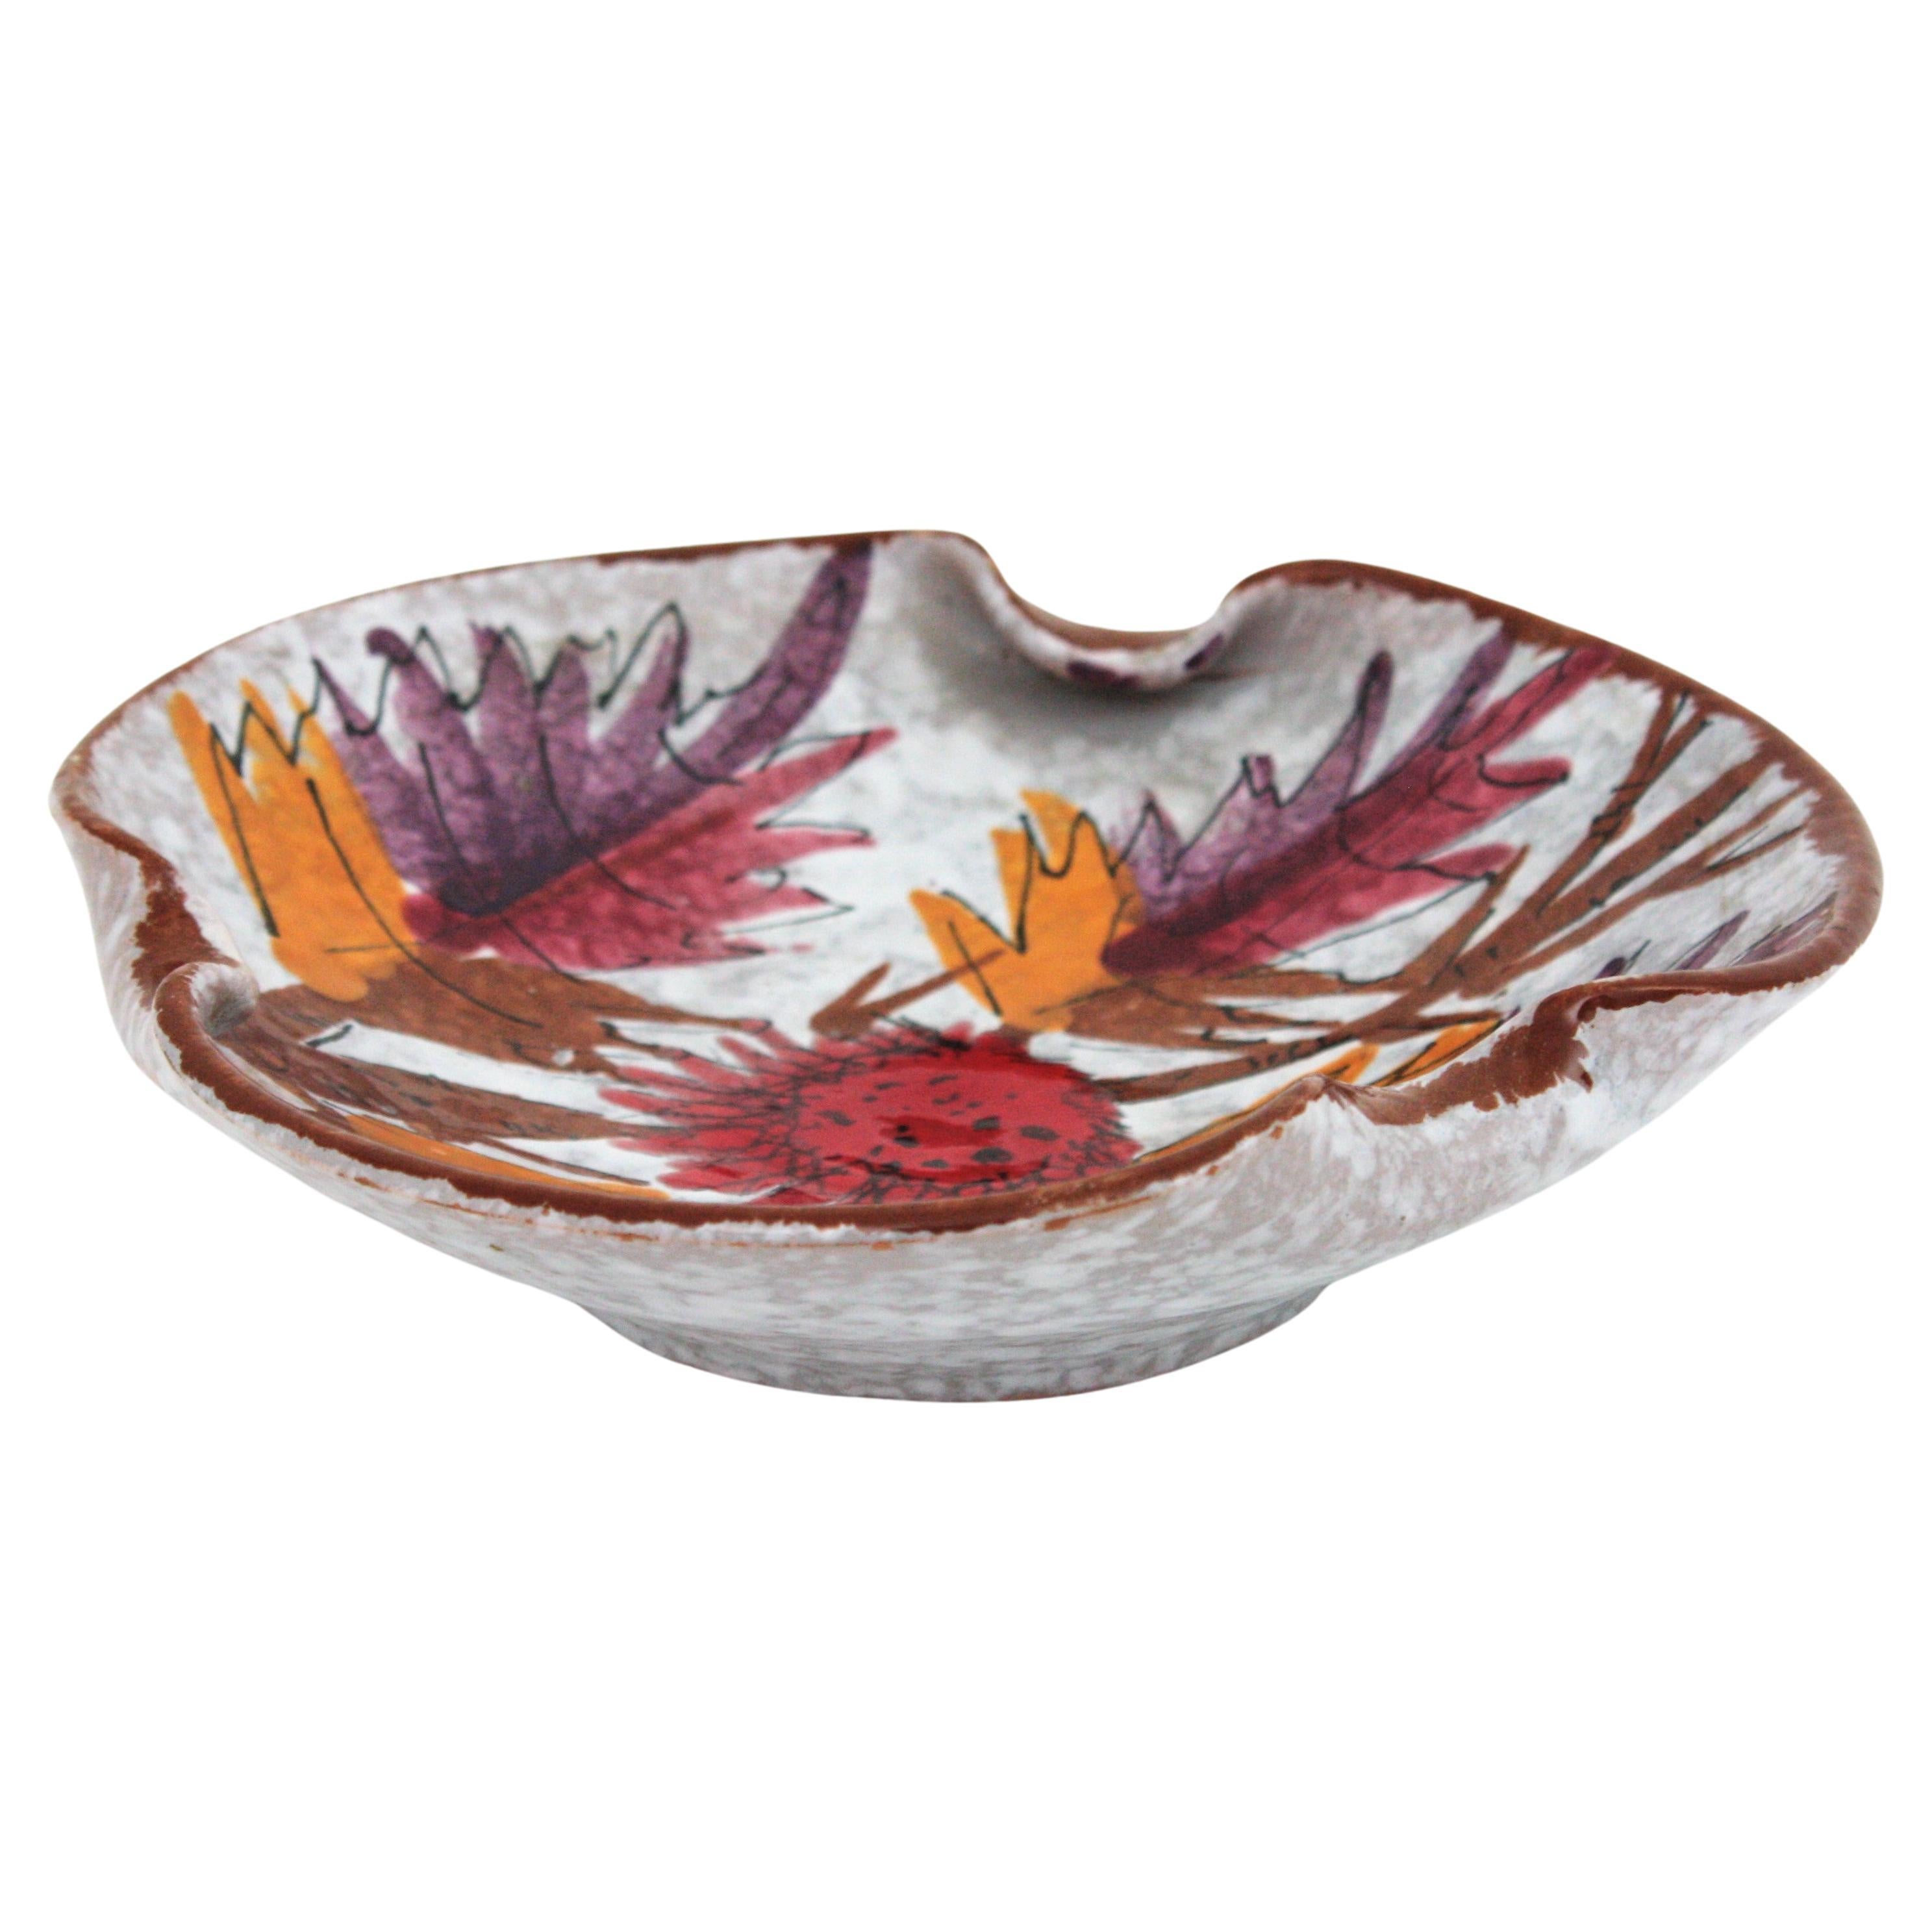 Mid-Century Modern Midcentury Decorative Bowl in Glazed Terracota and Foliage Motif For Sale